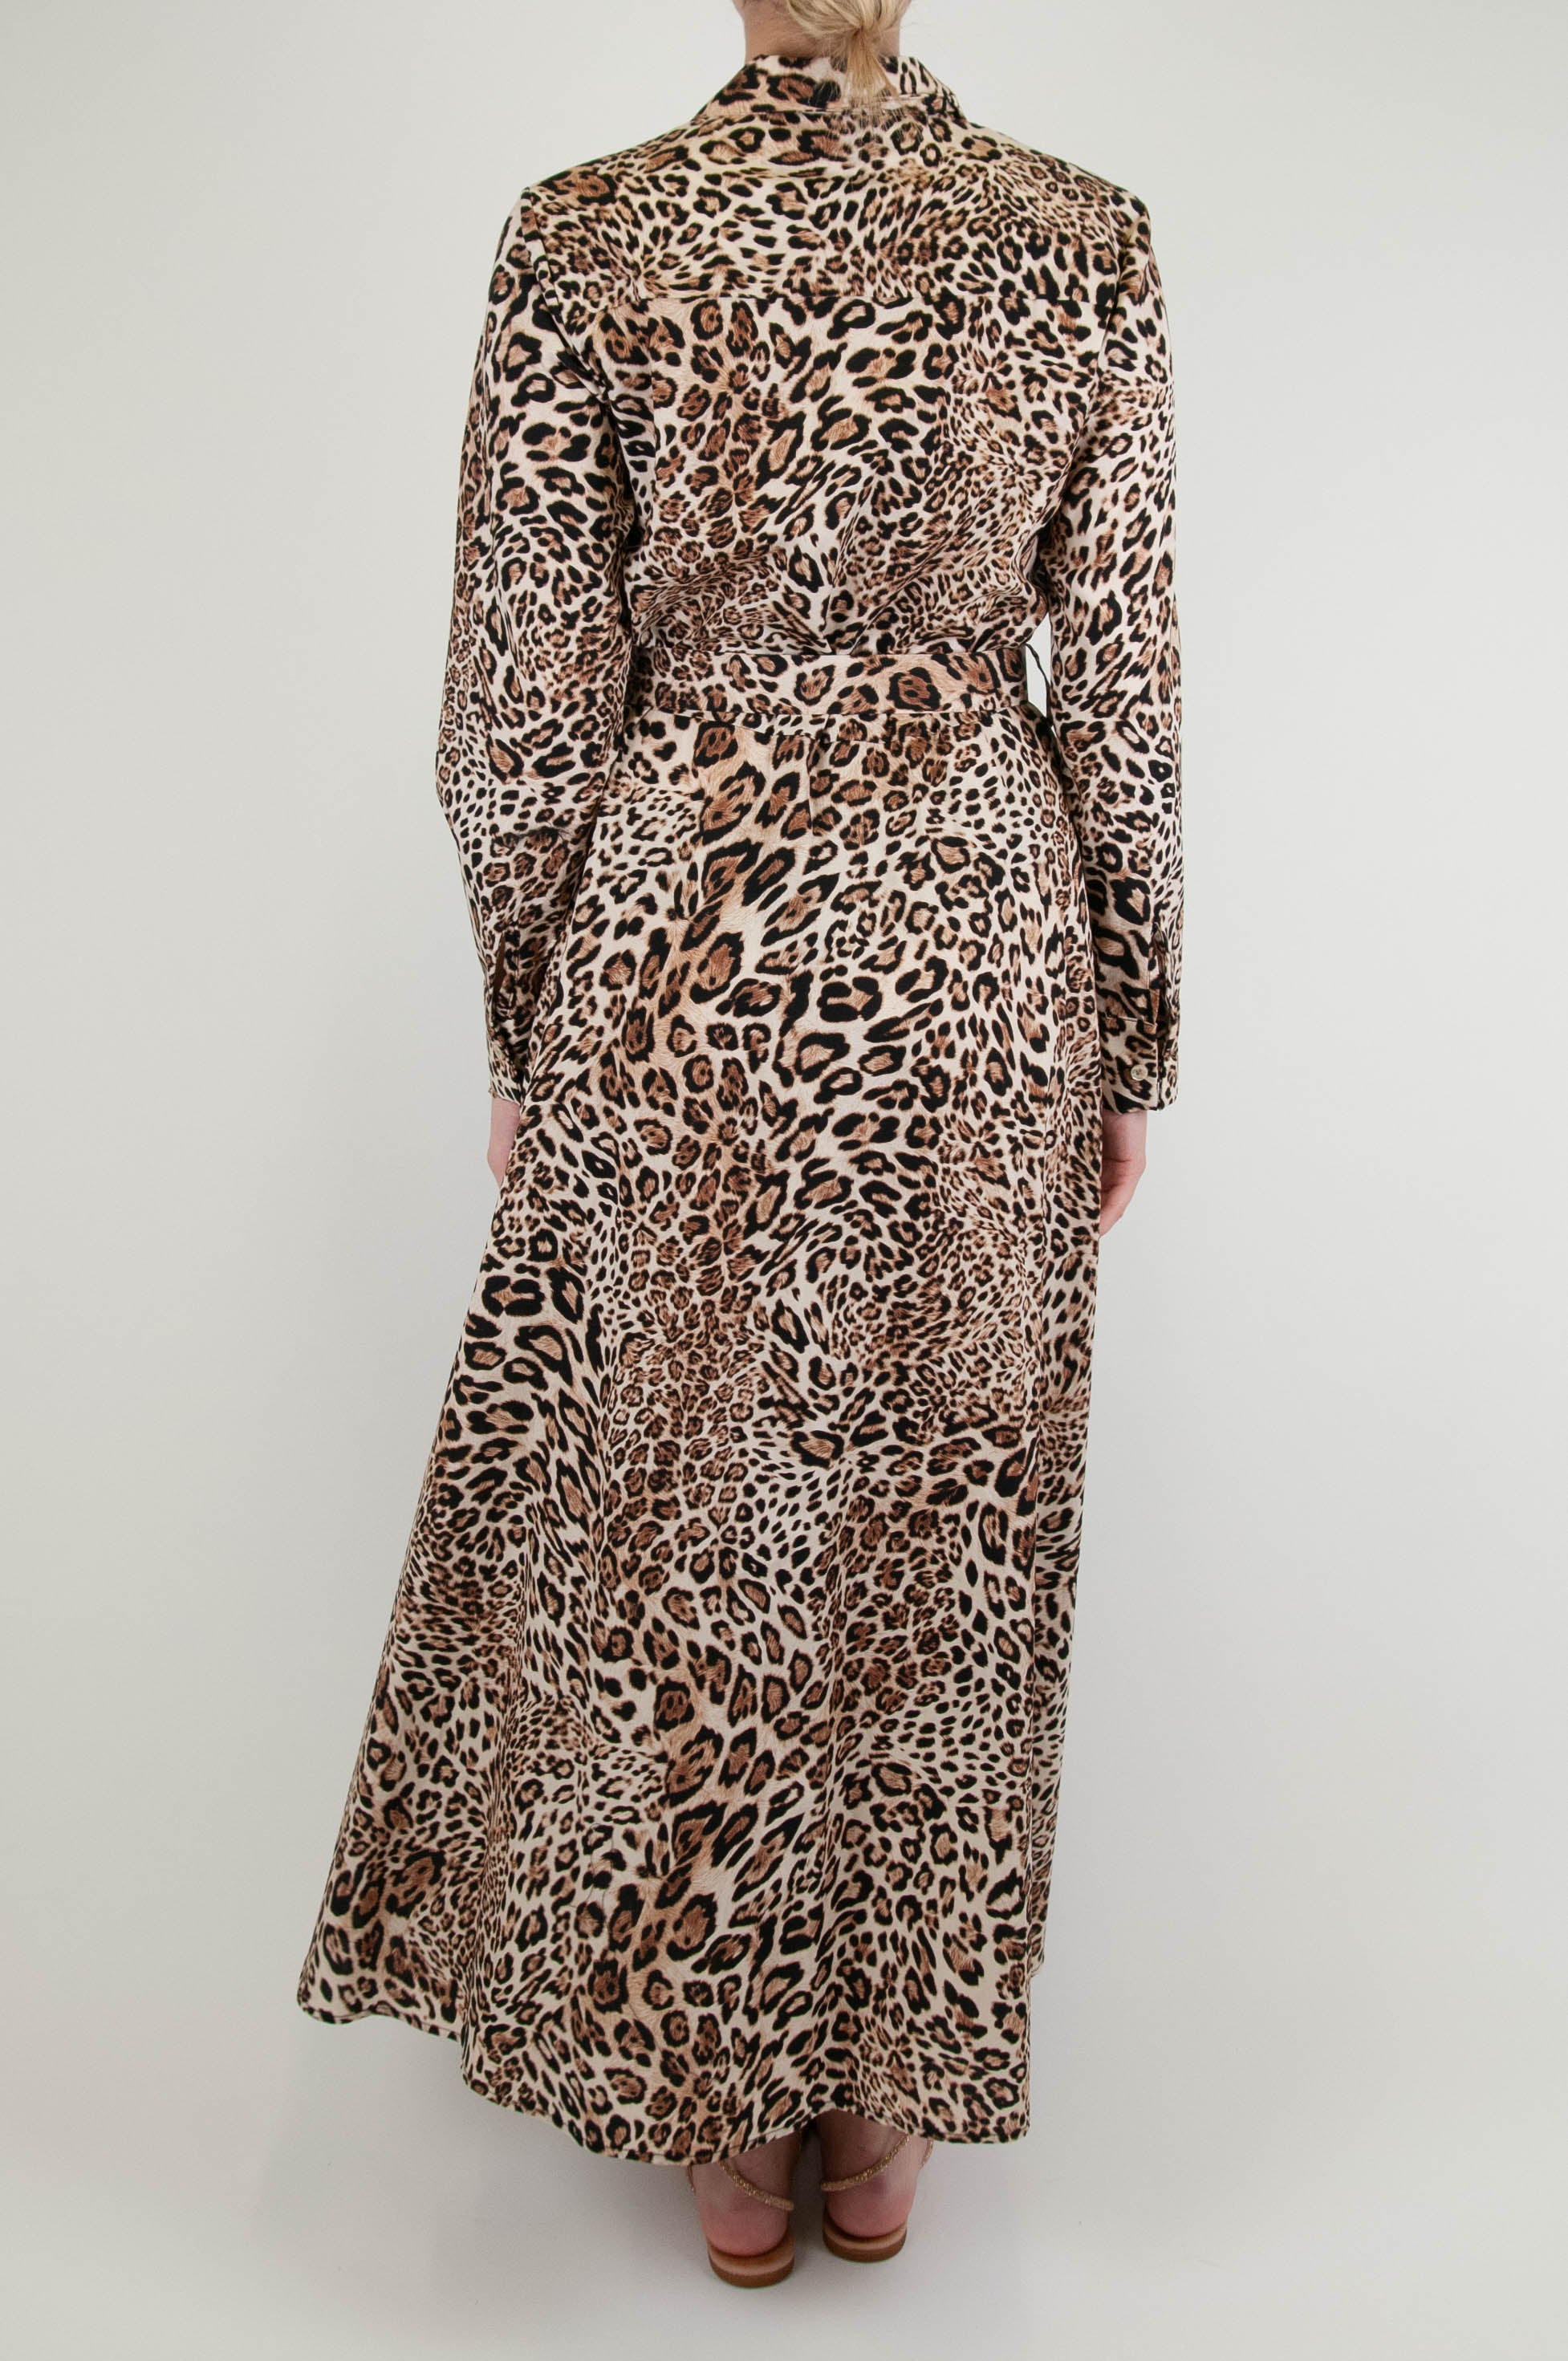 Tension in - Animal print shirtdress with brooch